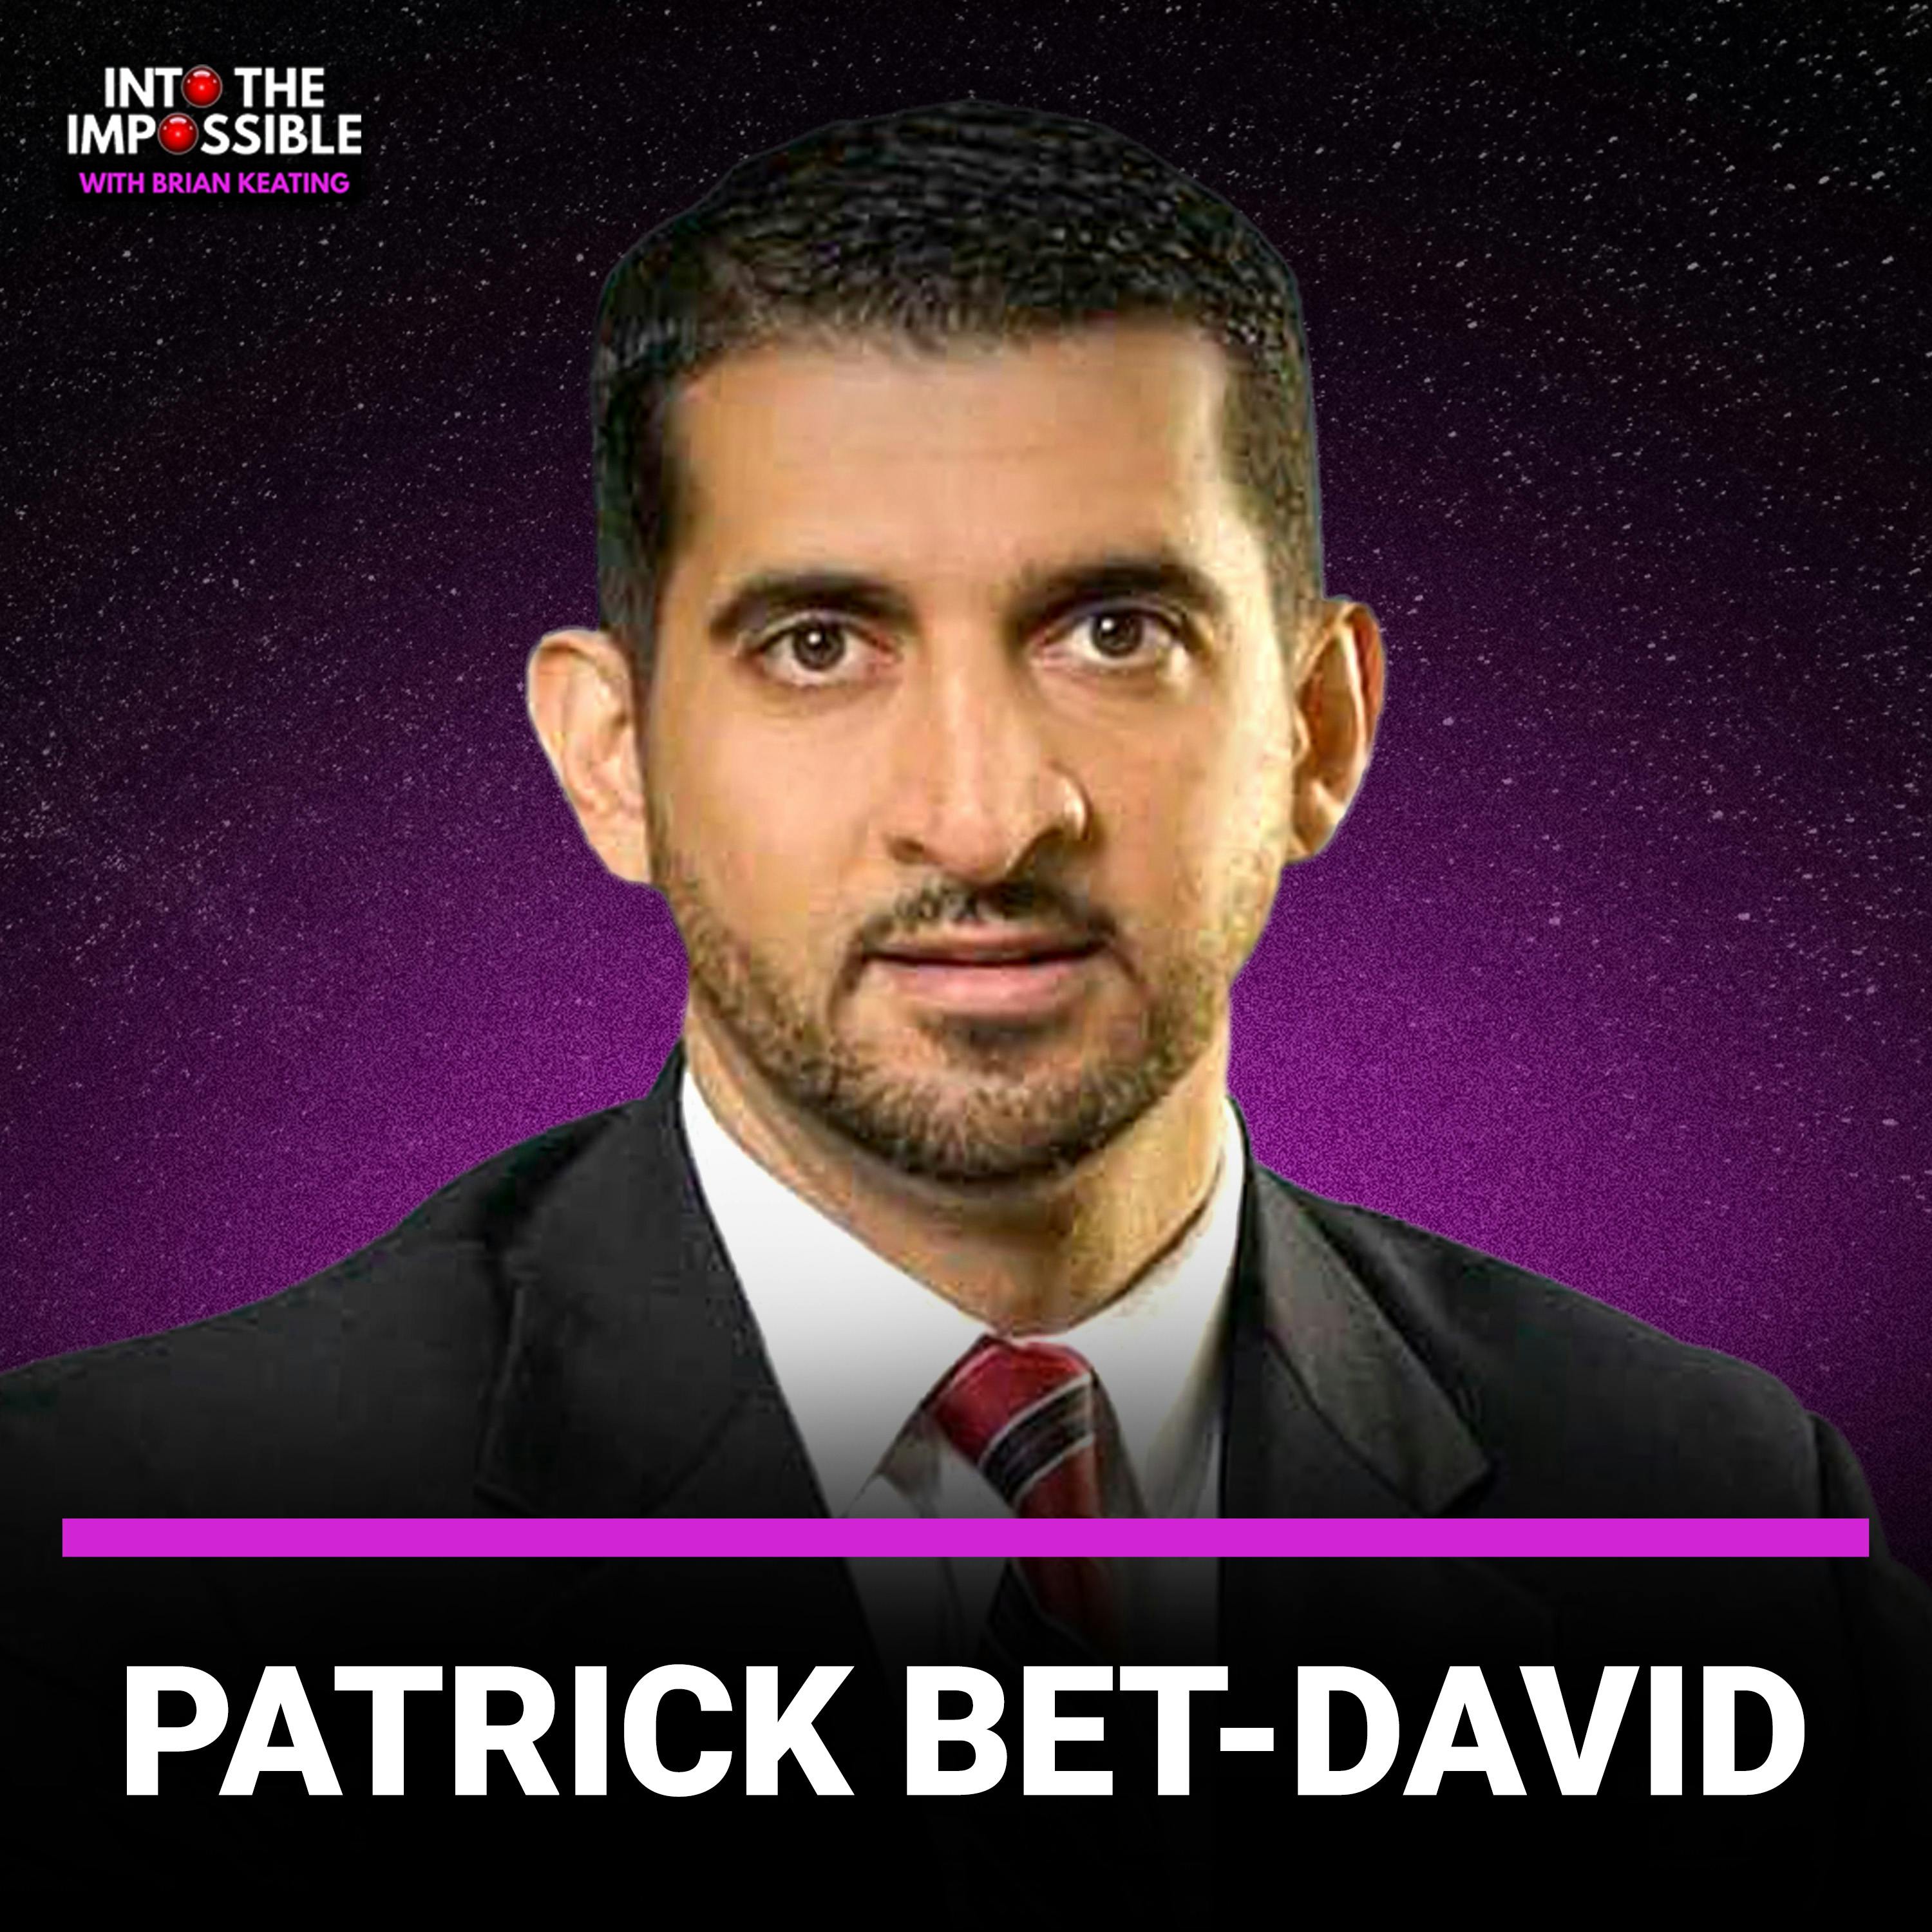 Patrick Bet-David shares his next 5 moves in the event of an economic downturn (#360)